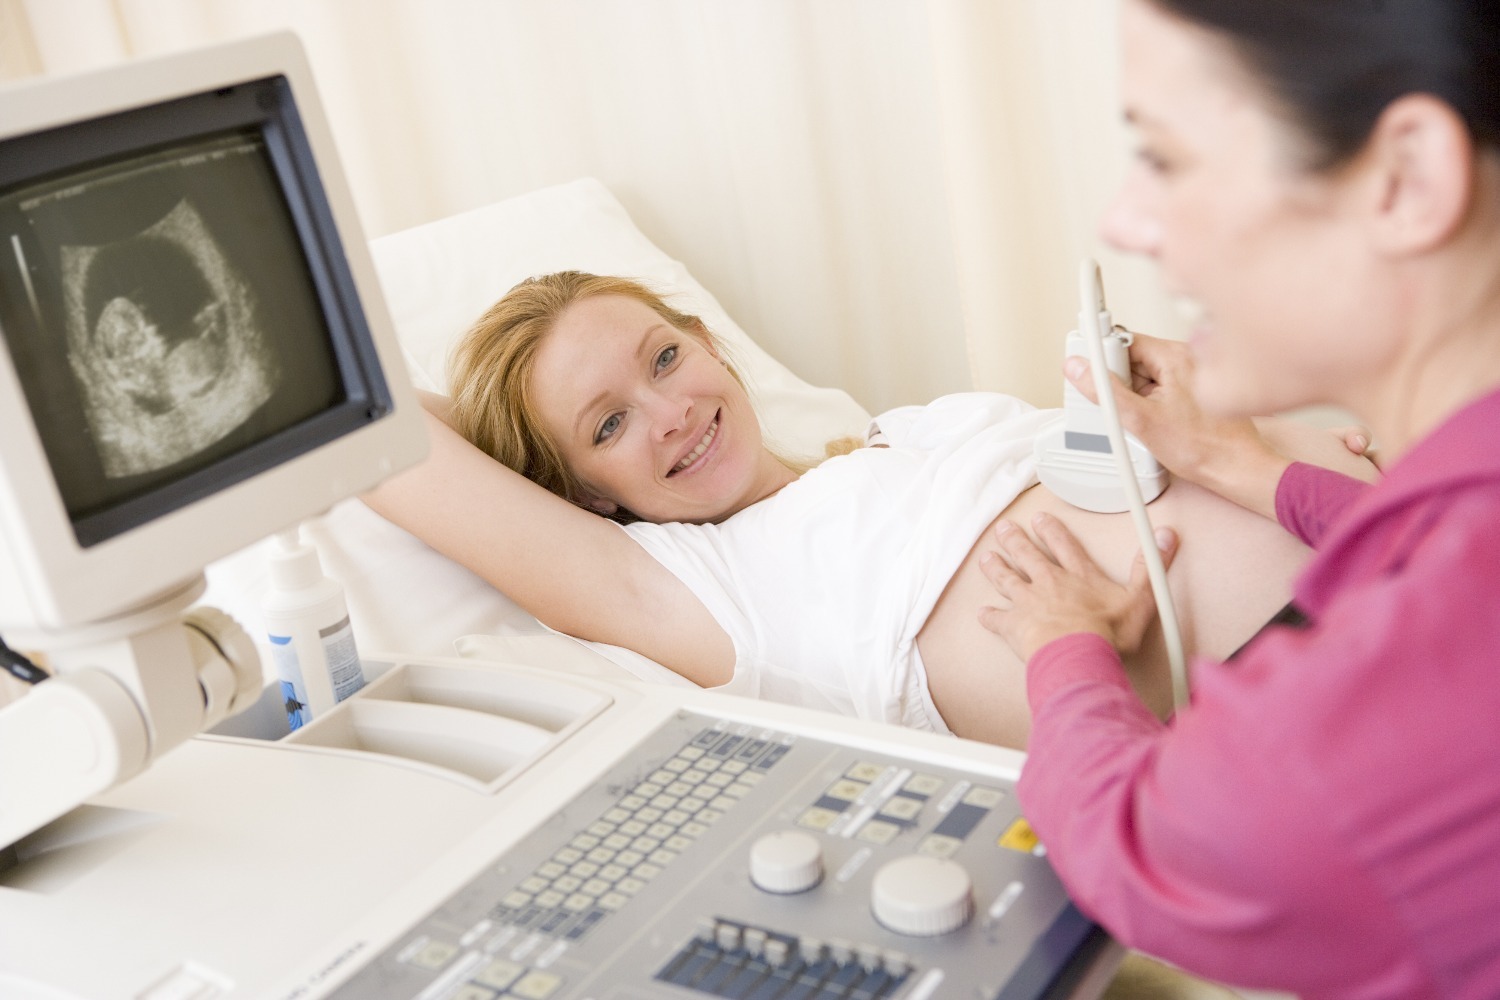 What You Need To Know About The Second Prenatal Visit